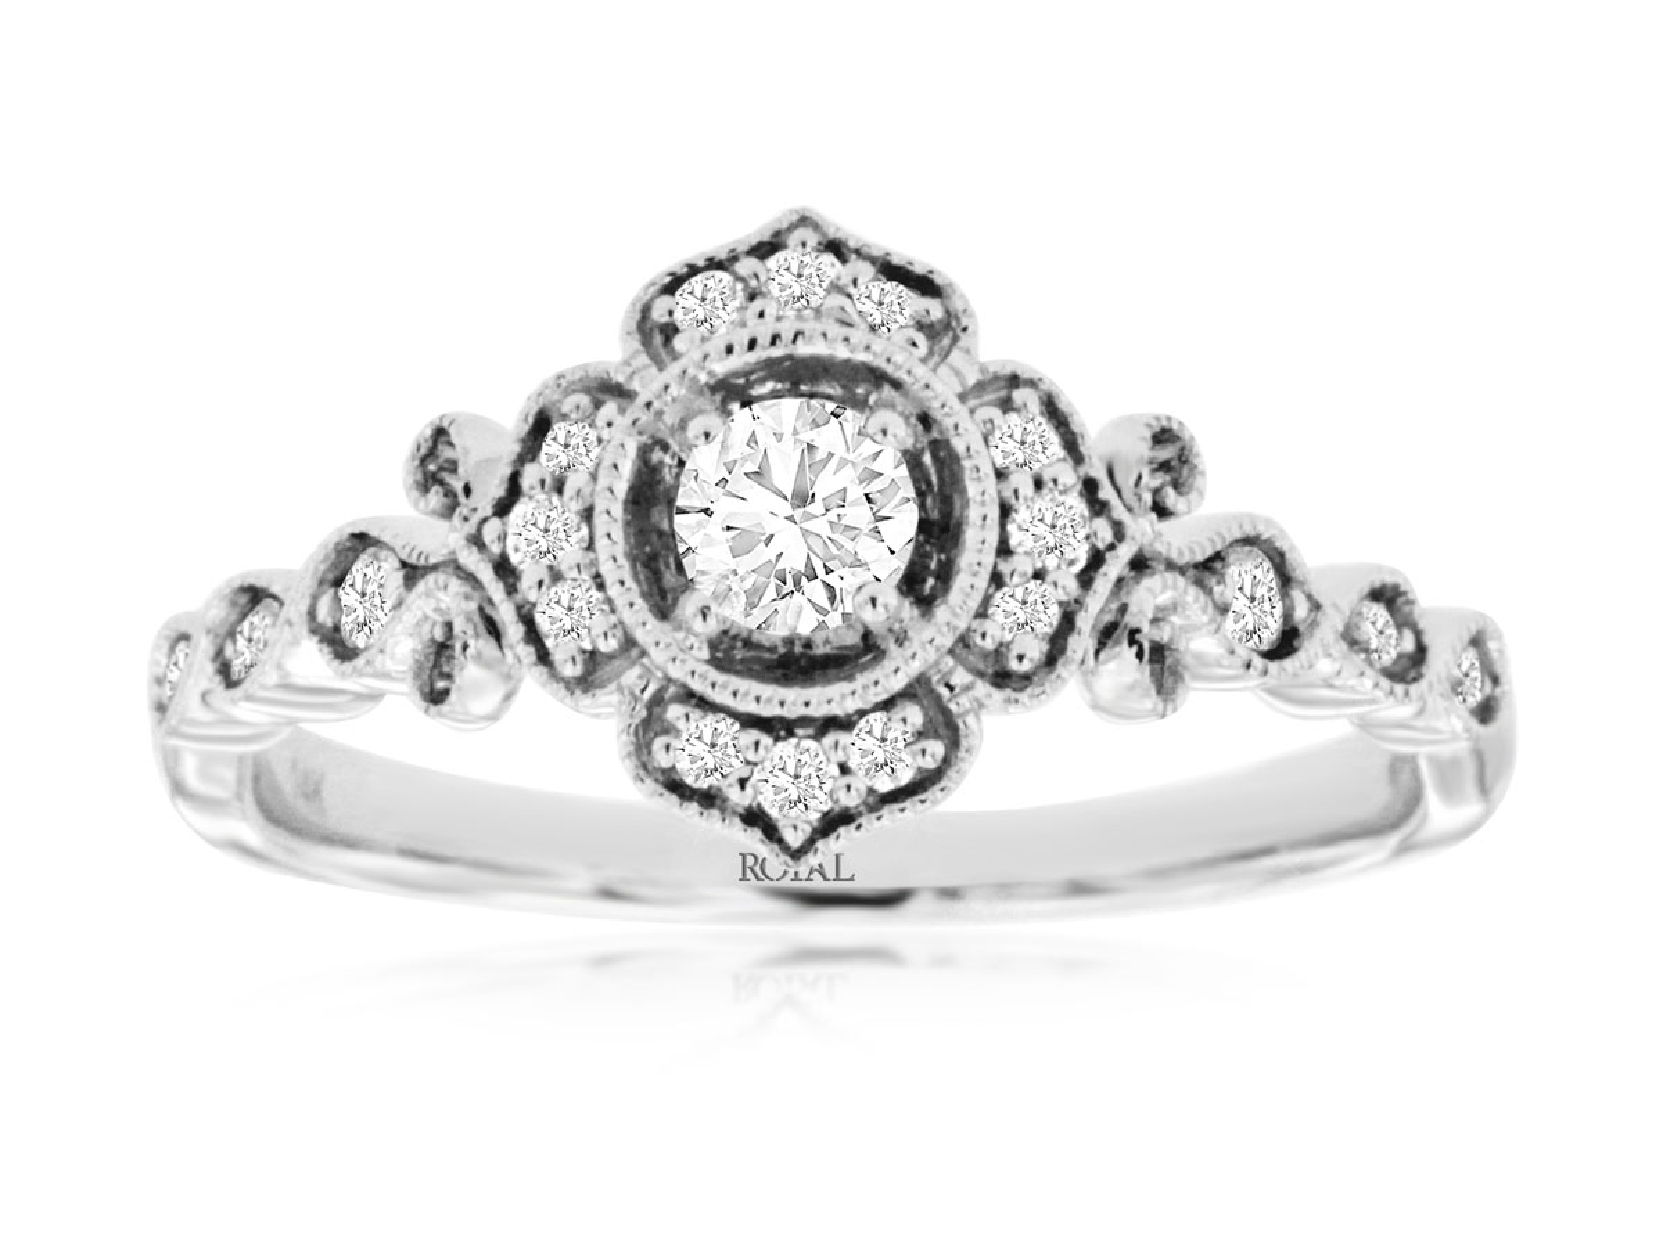 14K White Gold Round Diamond Engagement Ring with Art Deco Inspired Stylized Halo and Accent Diamonds Down the Band

Size 7
0.30cttw Diamonds